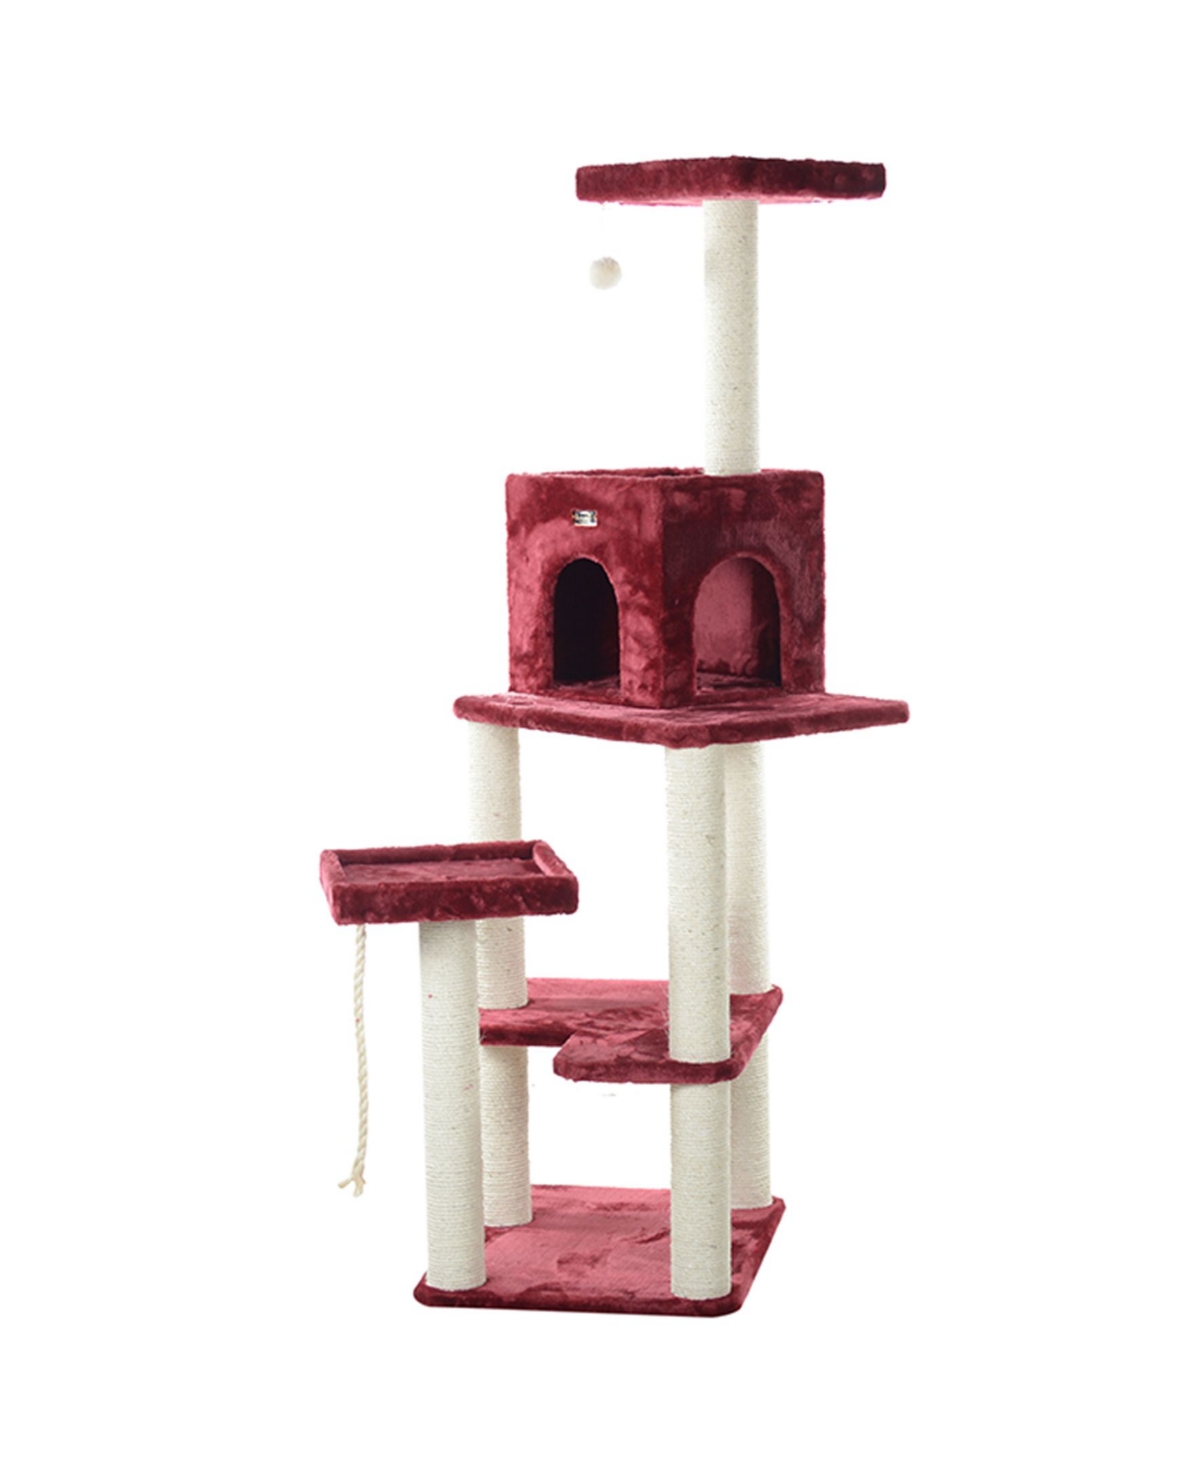 Real Wood Cat Tower, Ultra Thick Faux Fur Covered Cat Condo - Burgundy